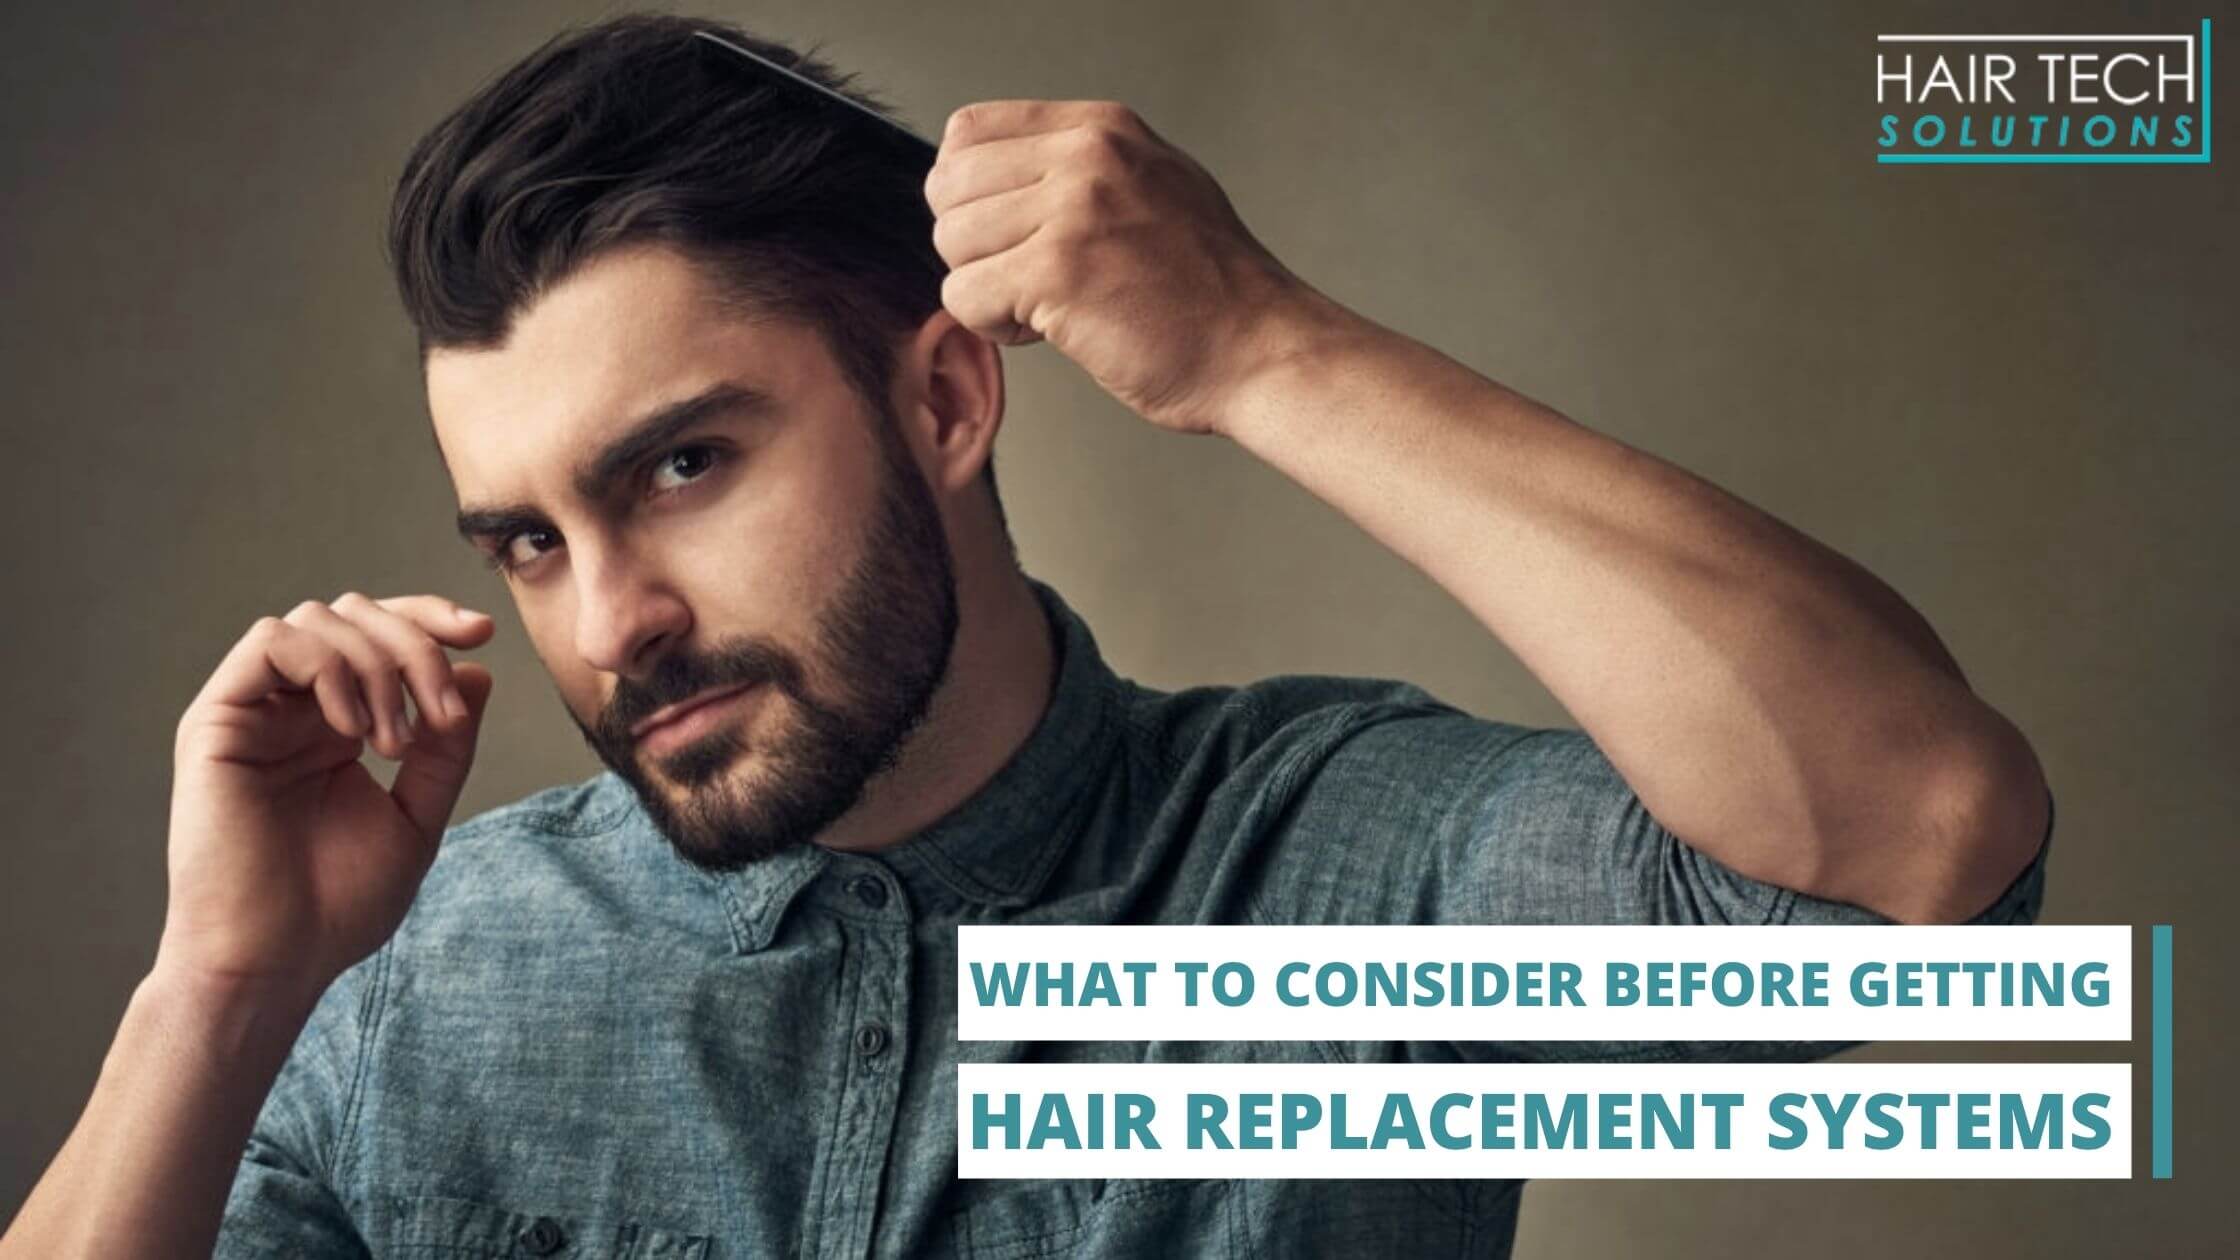 What to Consider Before Getting Hair Replacement Systems